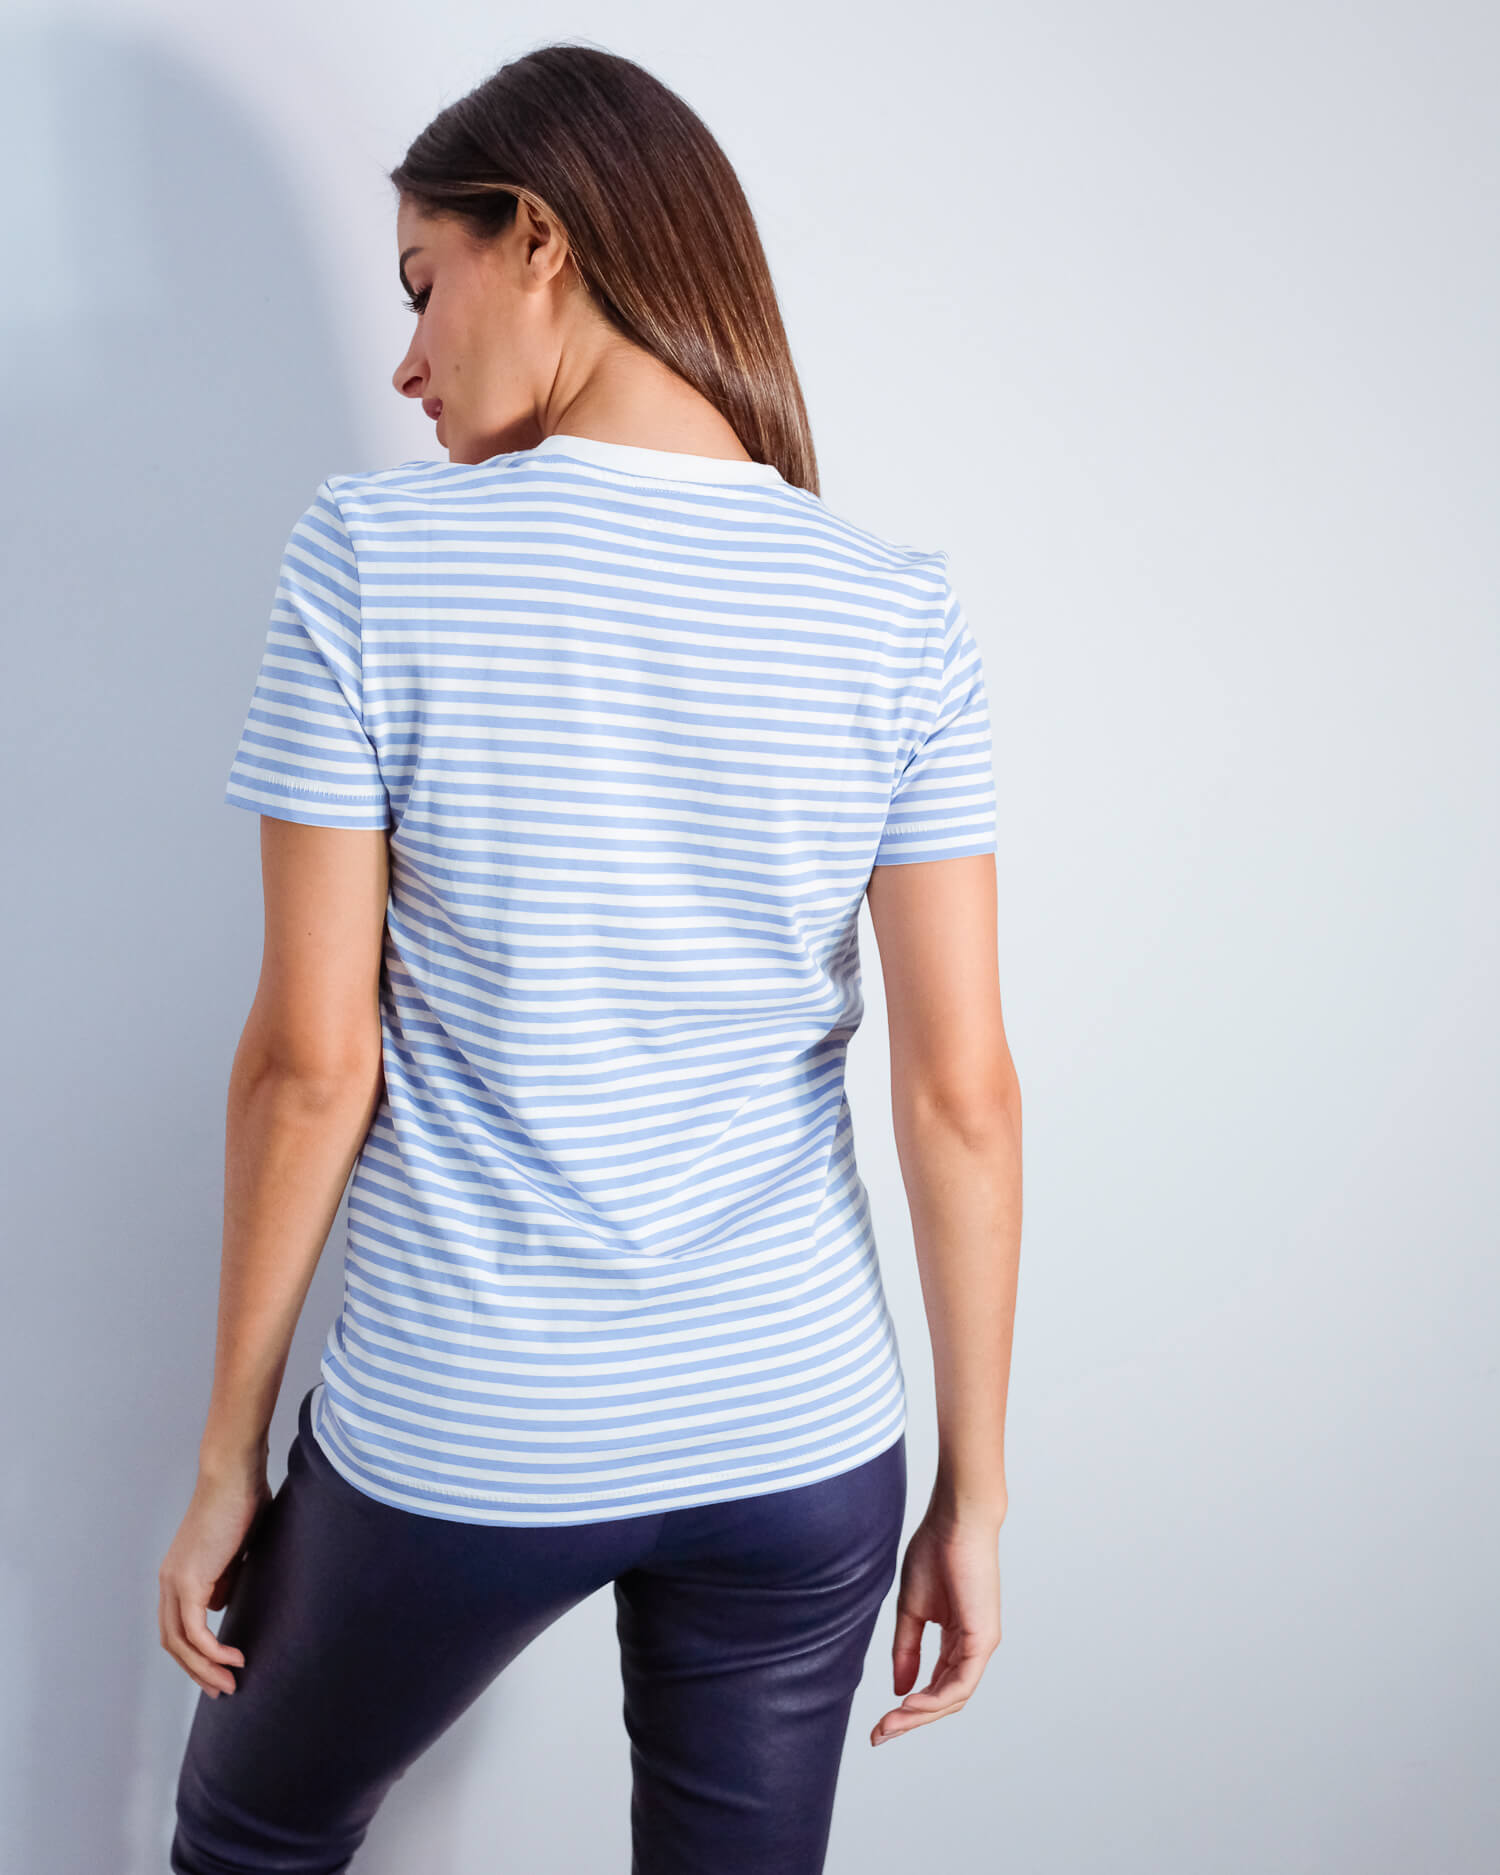 SLF My Perfect Tee in blue and white stripe